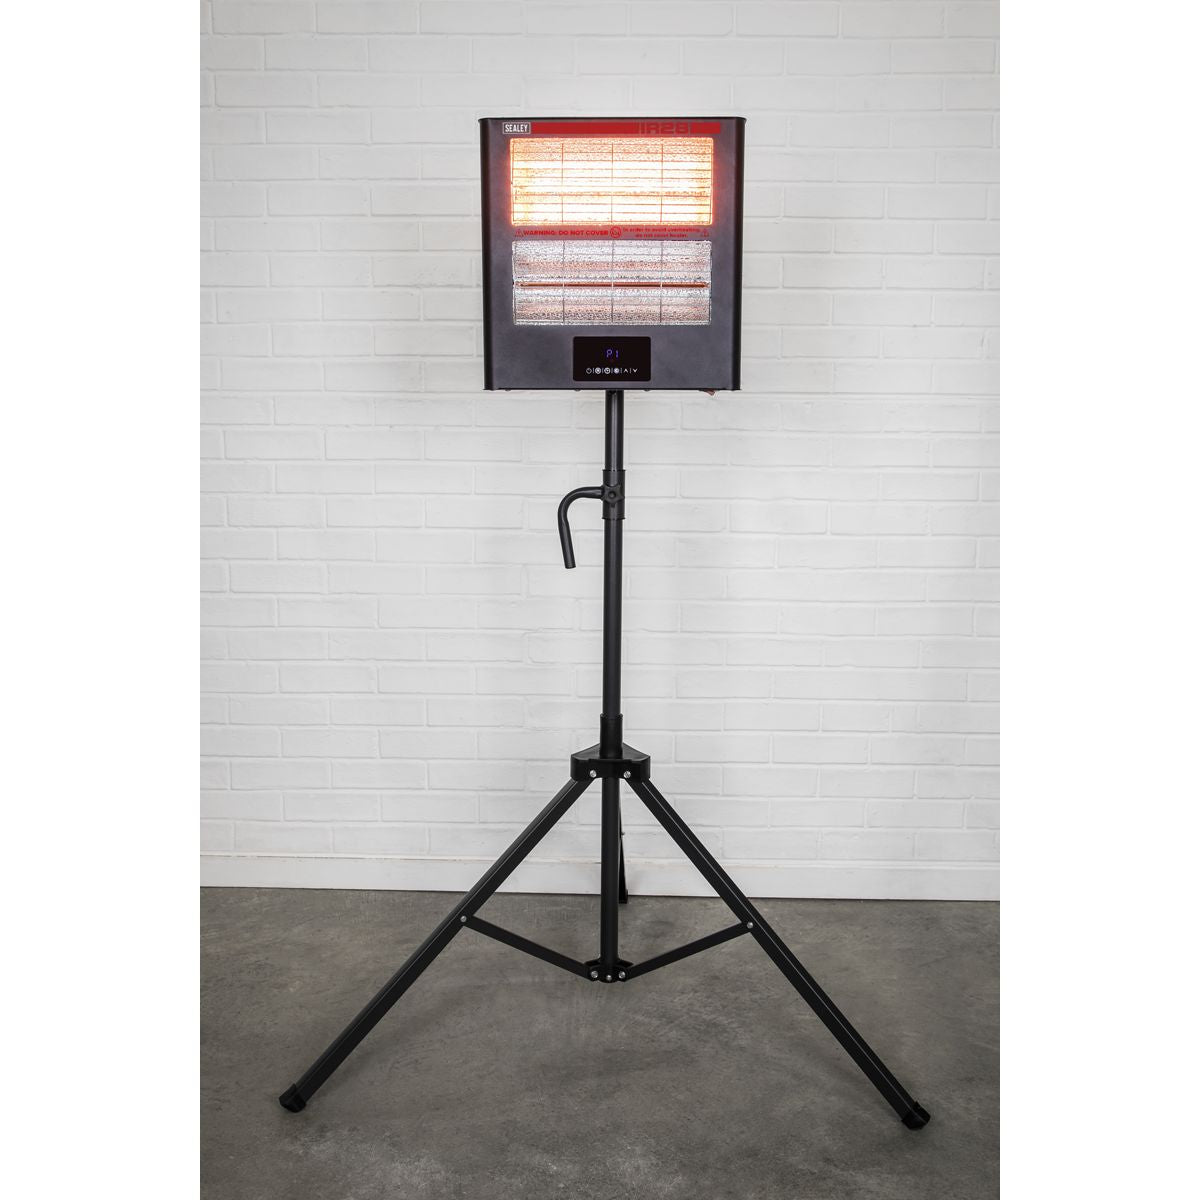 Sealey IR28CT 1.4/2.8kW Infrared Quartz Heater with Tripod Stand 230V